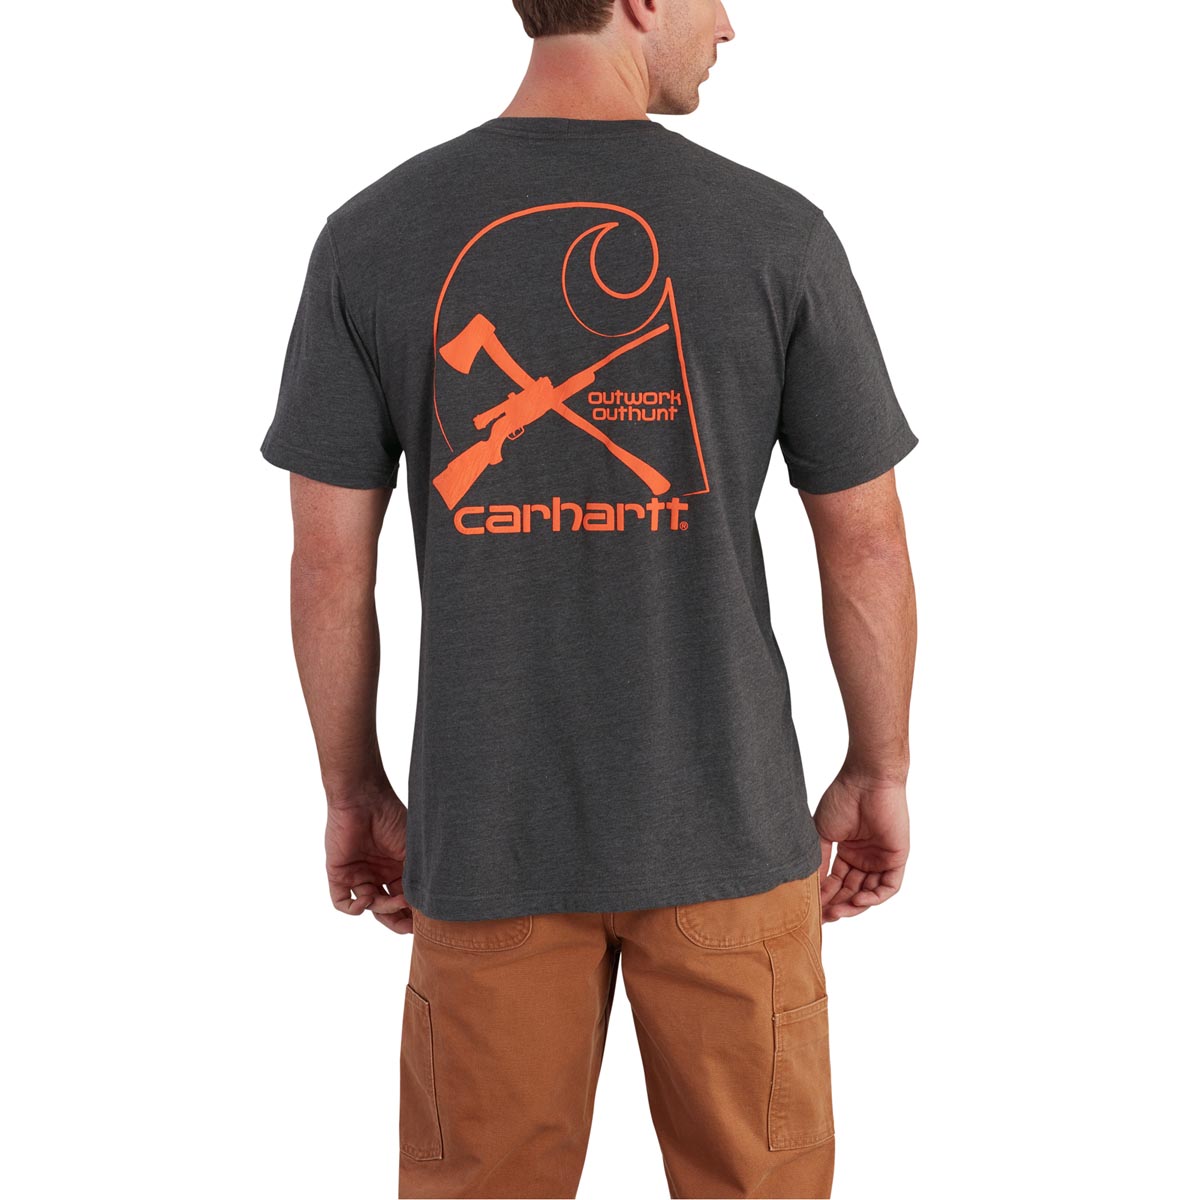 Carhartt Mens Maddock Graphic Rugged Outdoors Branded C Pocket T Shirt